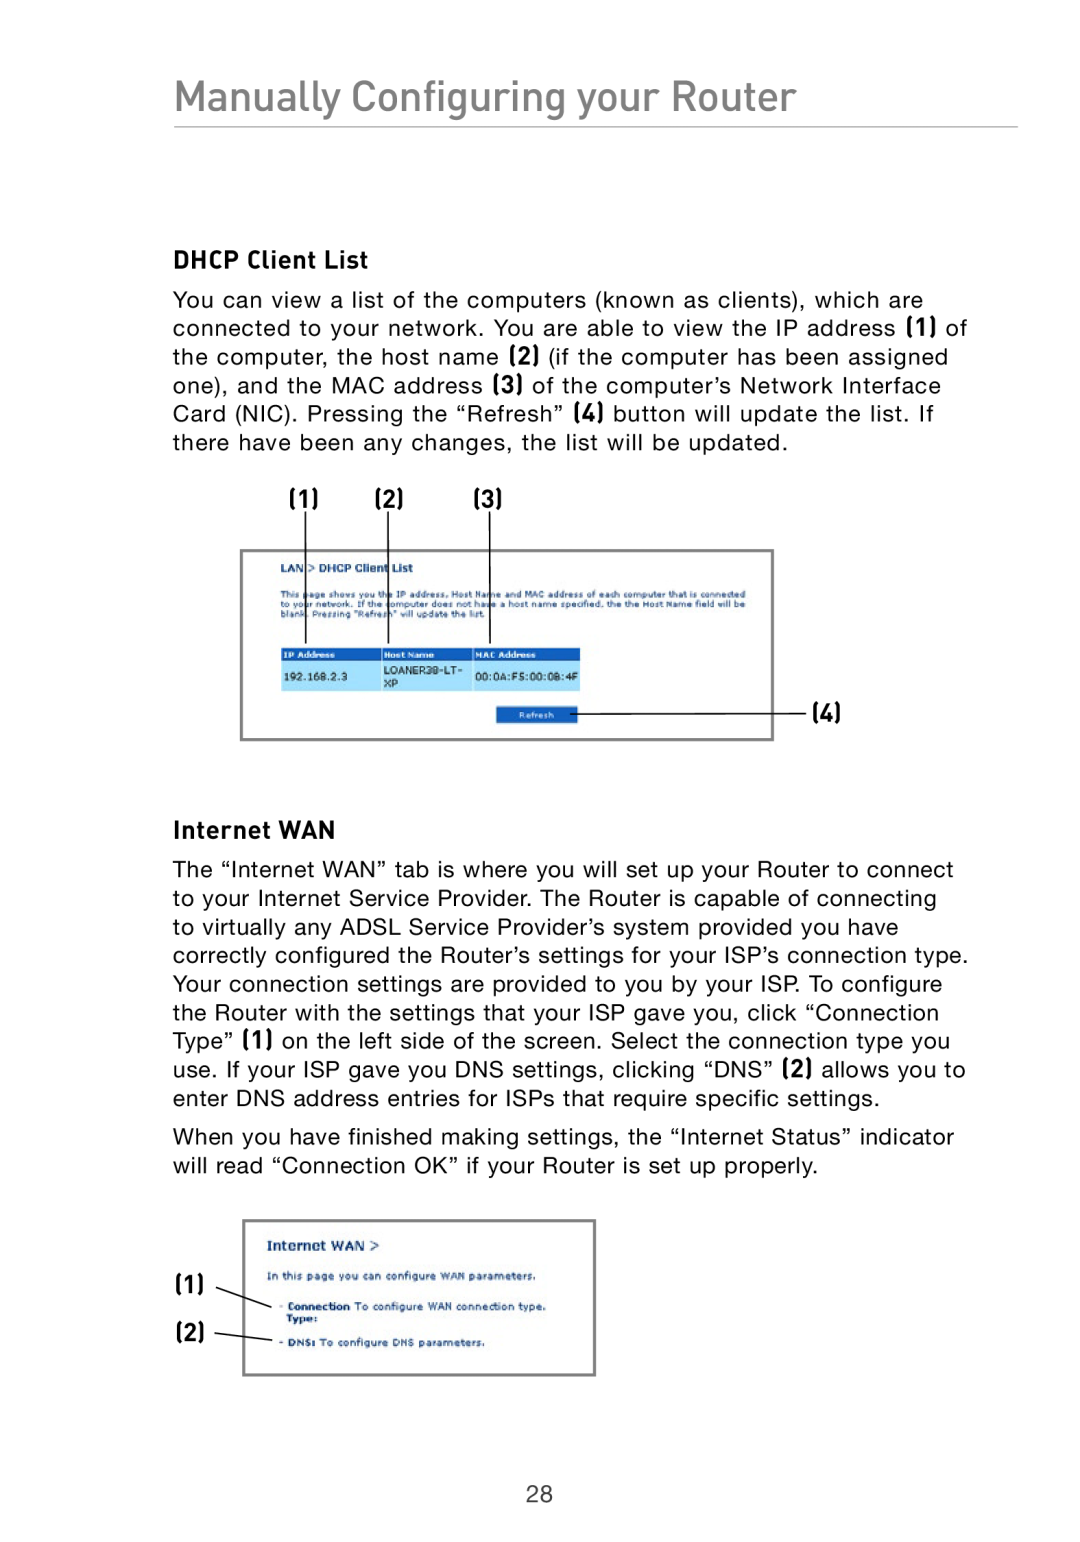 Belkin Pre-N manual DHCP Client List, Internet WAN, Manually Configuring your Router 